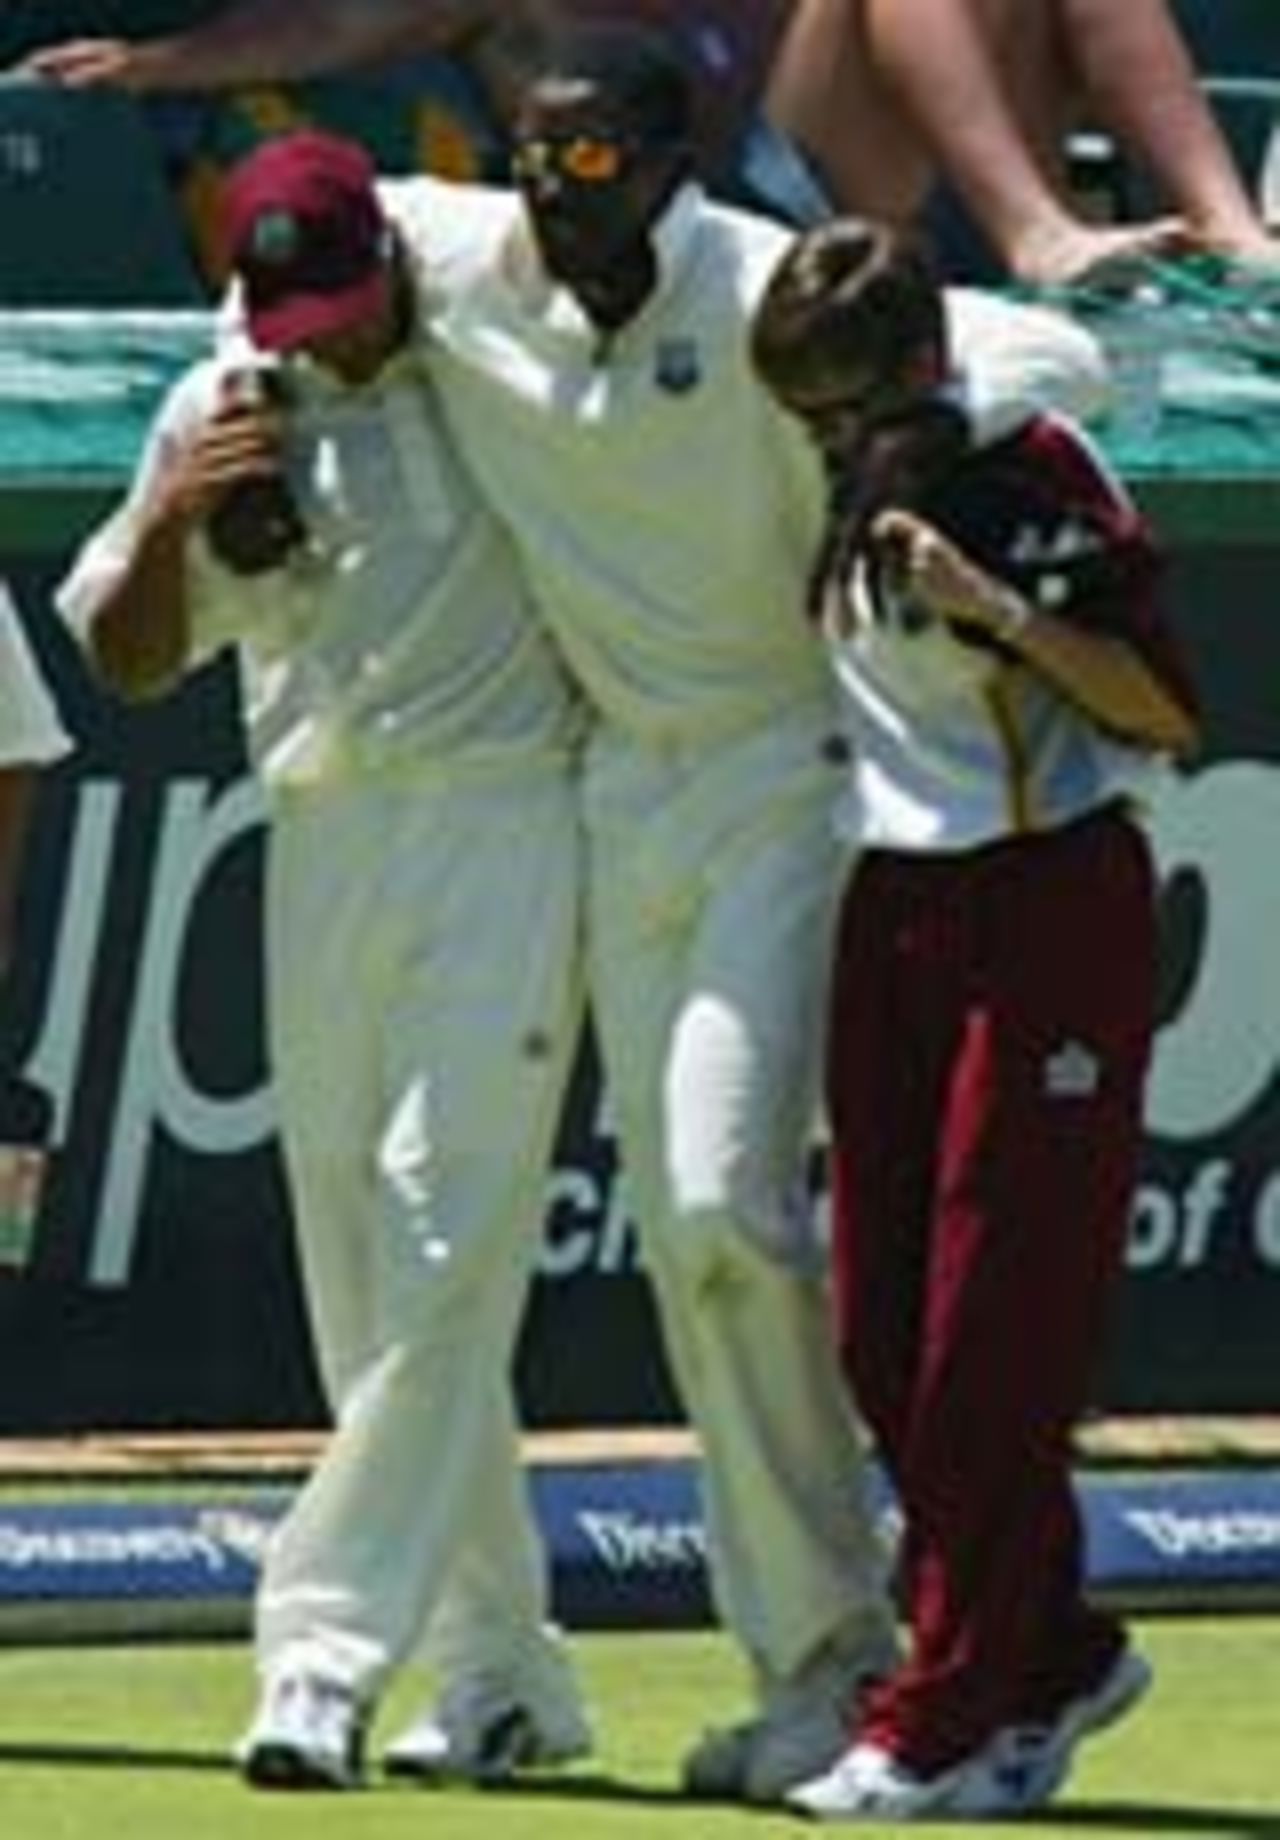 Chris Gayle hobbles from the field with a suspected pulled hamstring, South Africa v West Indies, 1st Test, Johannesburg, December 12, 2003